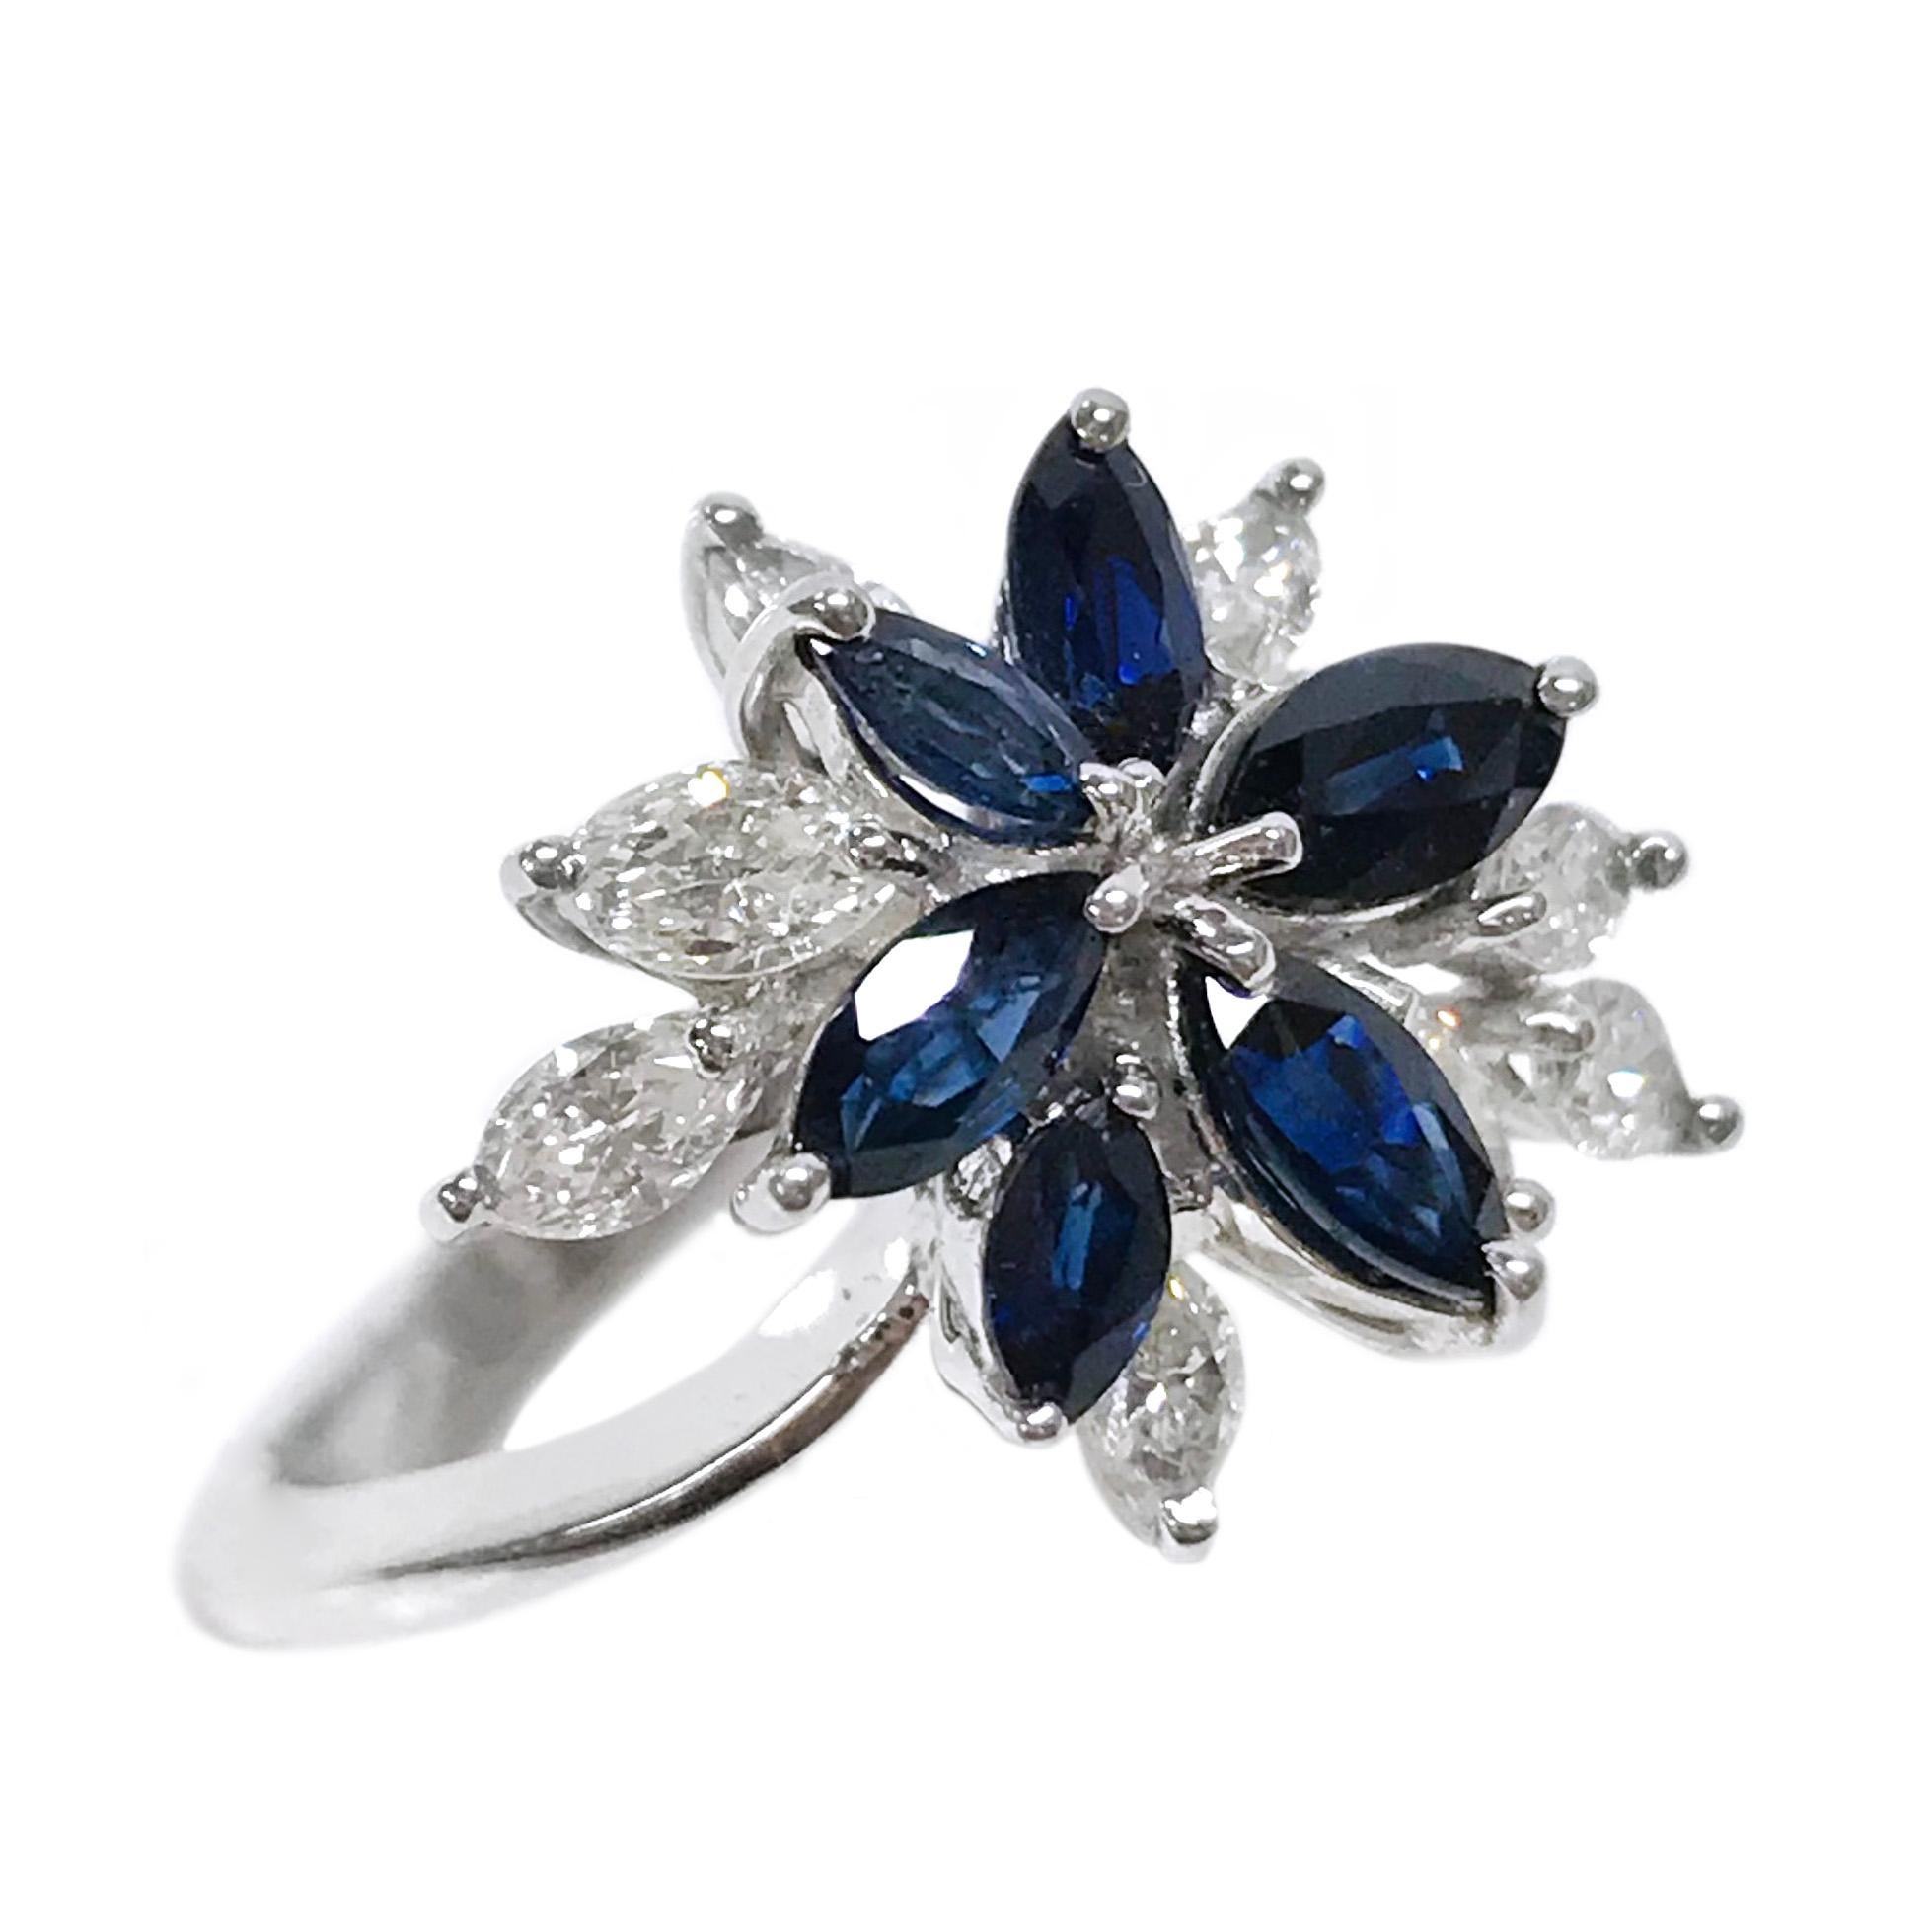 18 Karat Marquise-Cut Blue Sapphire Diamond Cluster Ring. The ring band tapers slightly being thicker at the bottom. The cluster ring features six marquise-cut blue sapphires and eight marquise diamonds, all stones are prong-set in white gold. The